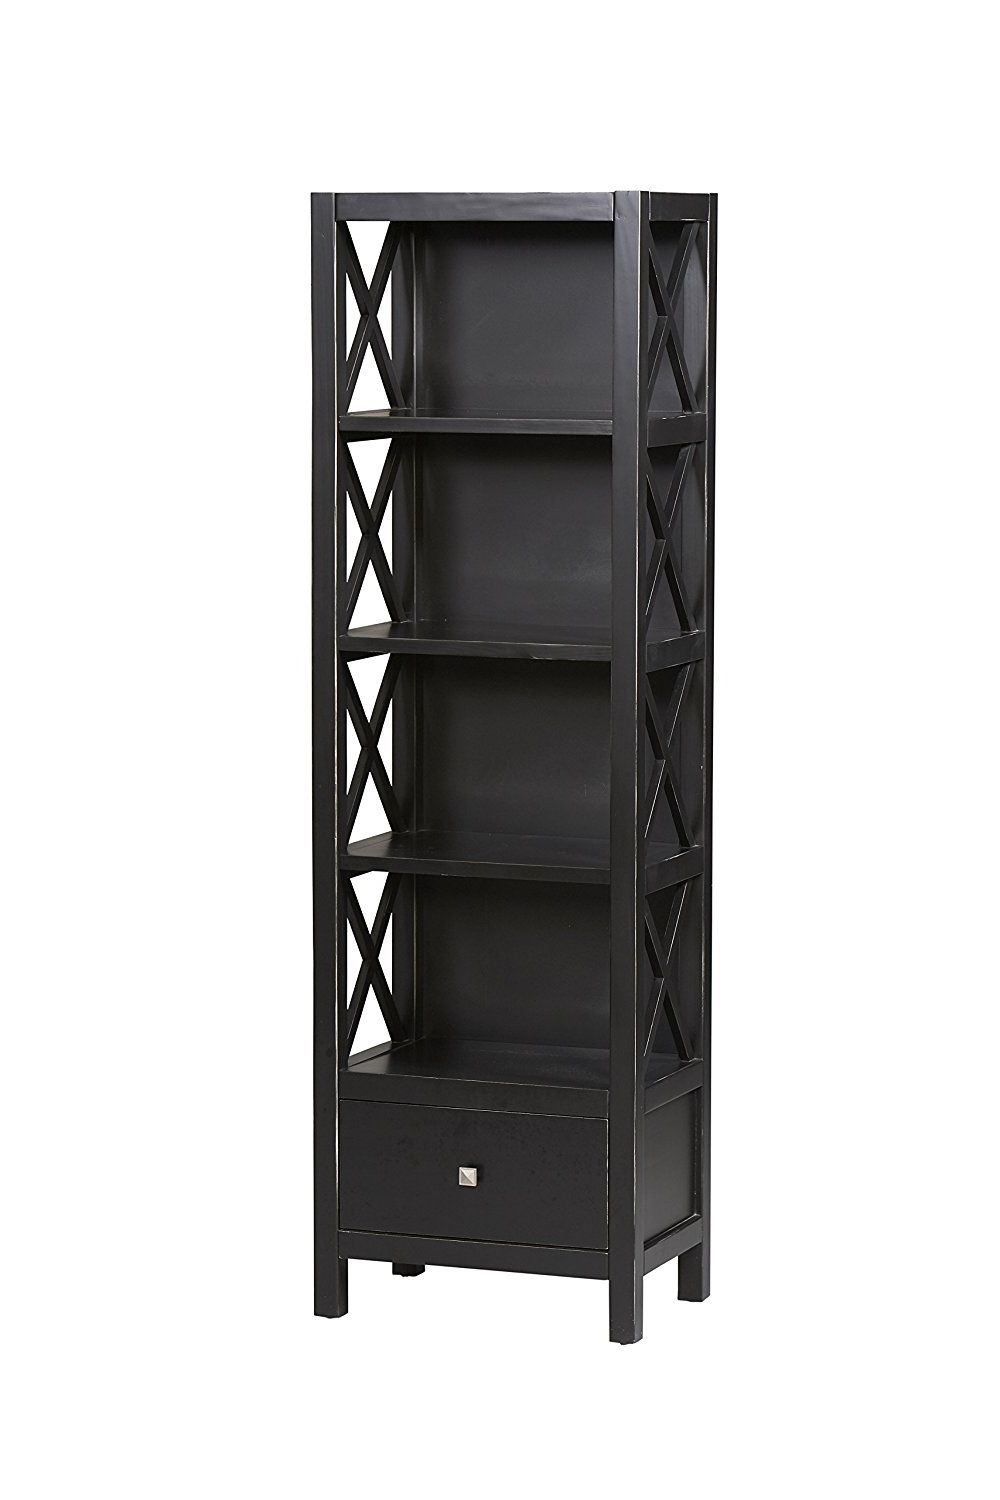 Narrow Tall Bookcases Pertaining To Most Popular Amazon: Linon Anna Collection Tall Narrow 5 Shelf Bookcase (View 6 of 15)